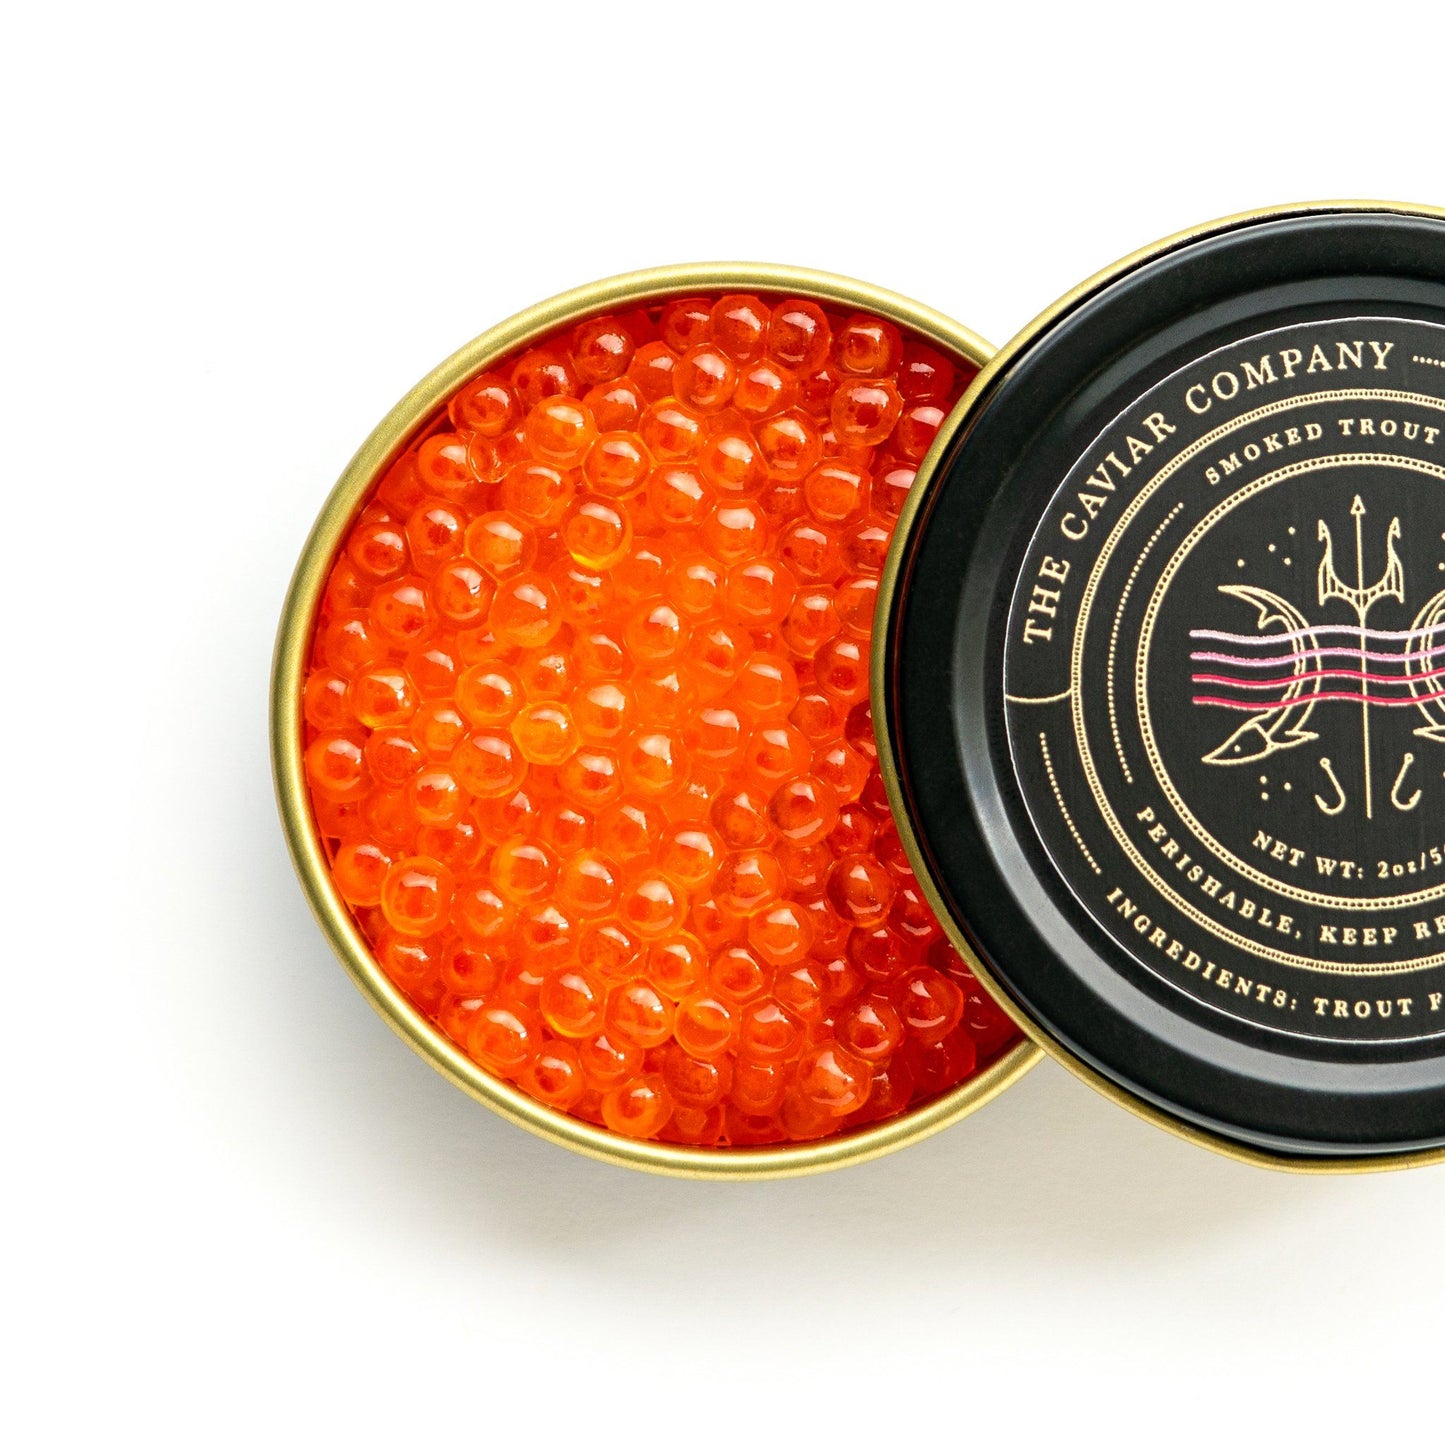 The Caviar Co "Smoked Trout", California - DECANTsf